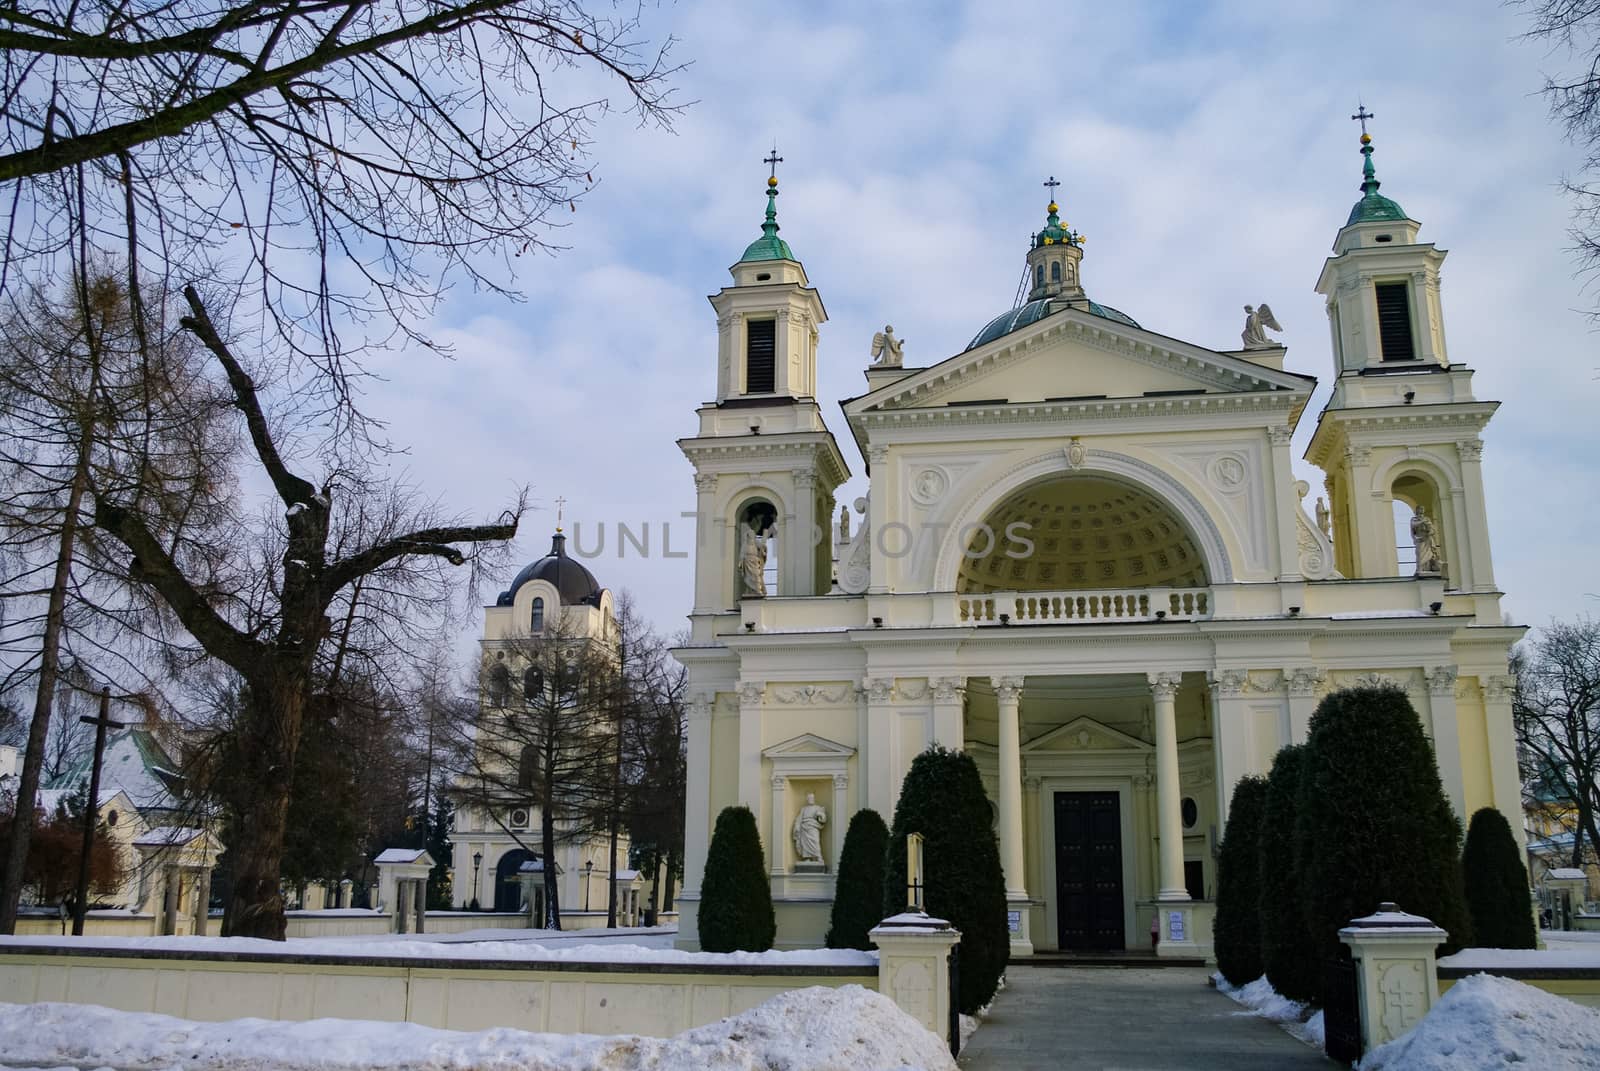 St. Anne's Church is a part of Wilanow Palace, Warsaw. Poland